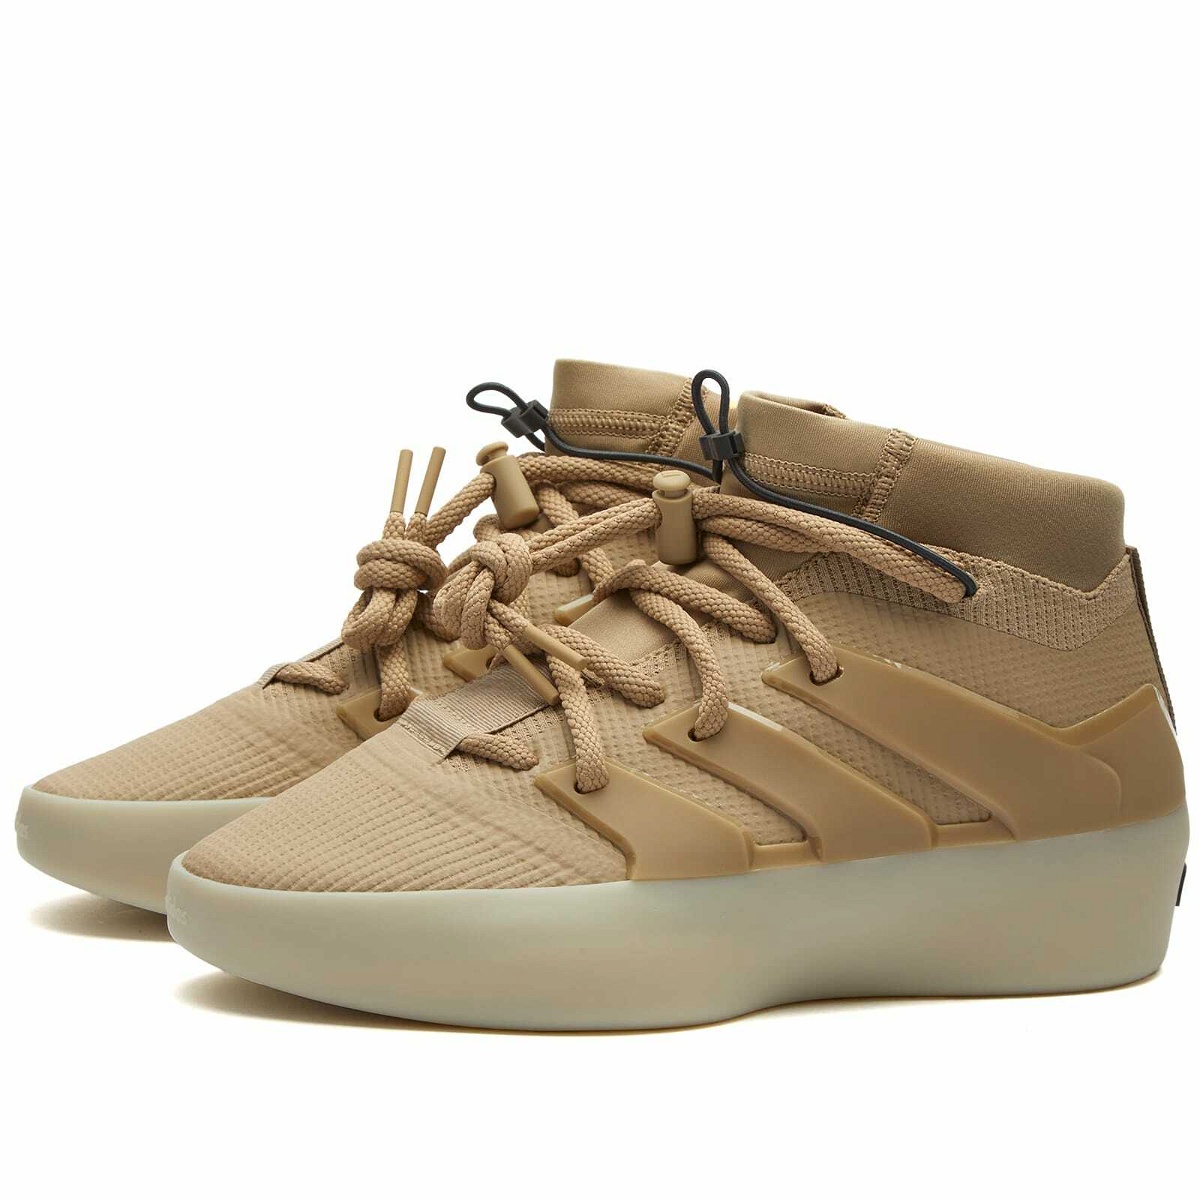 Photo: Adidas x Fear of God Athletics I Basketball Sneakers in Clay